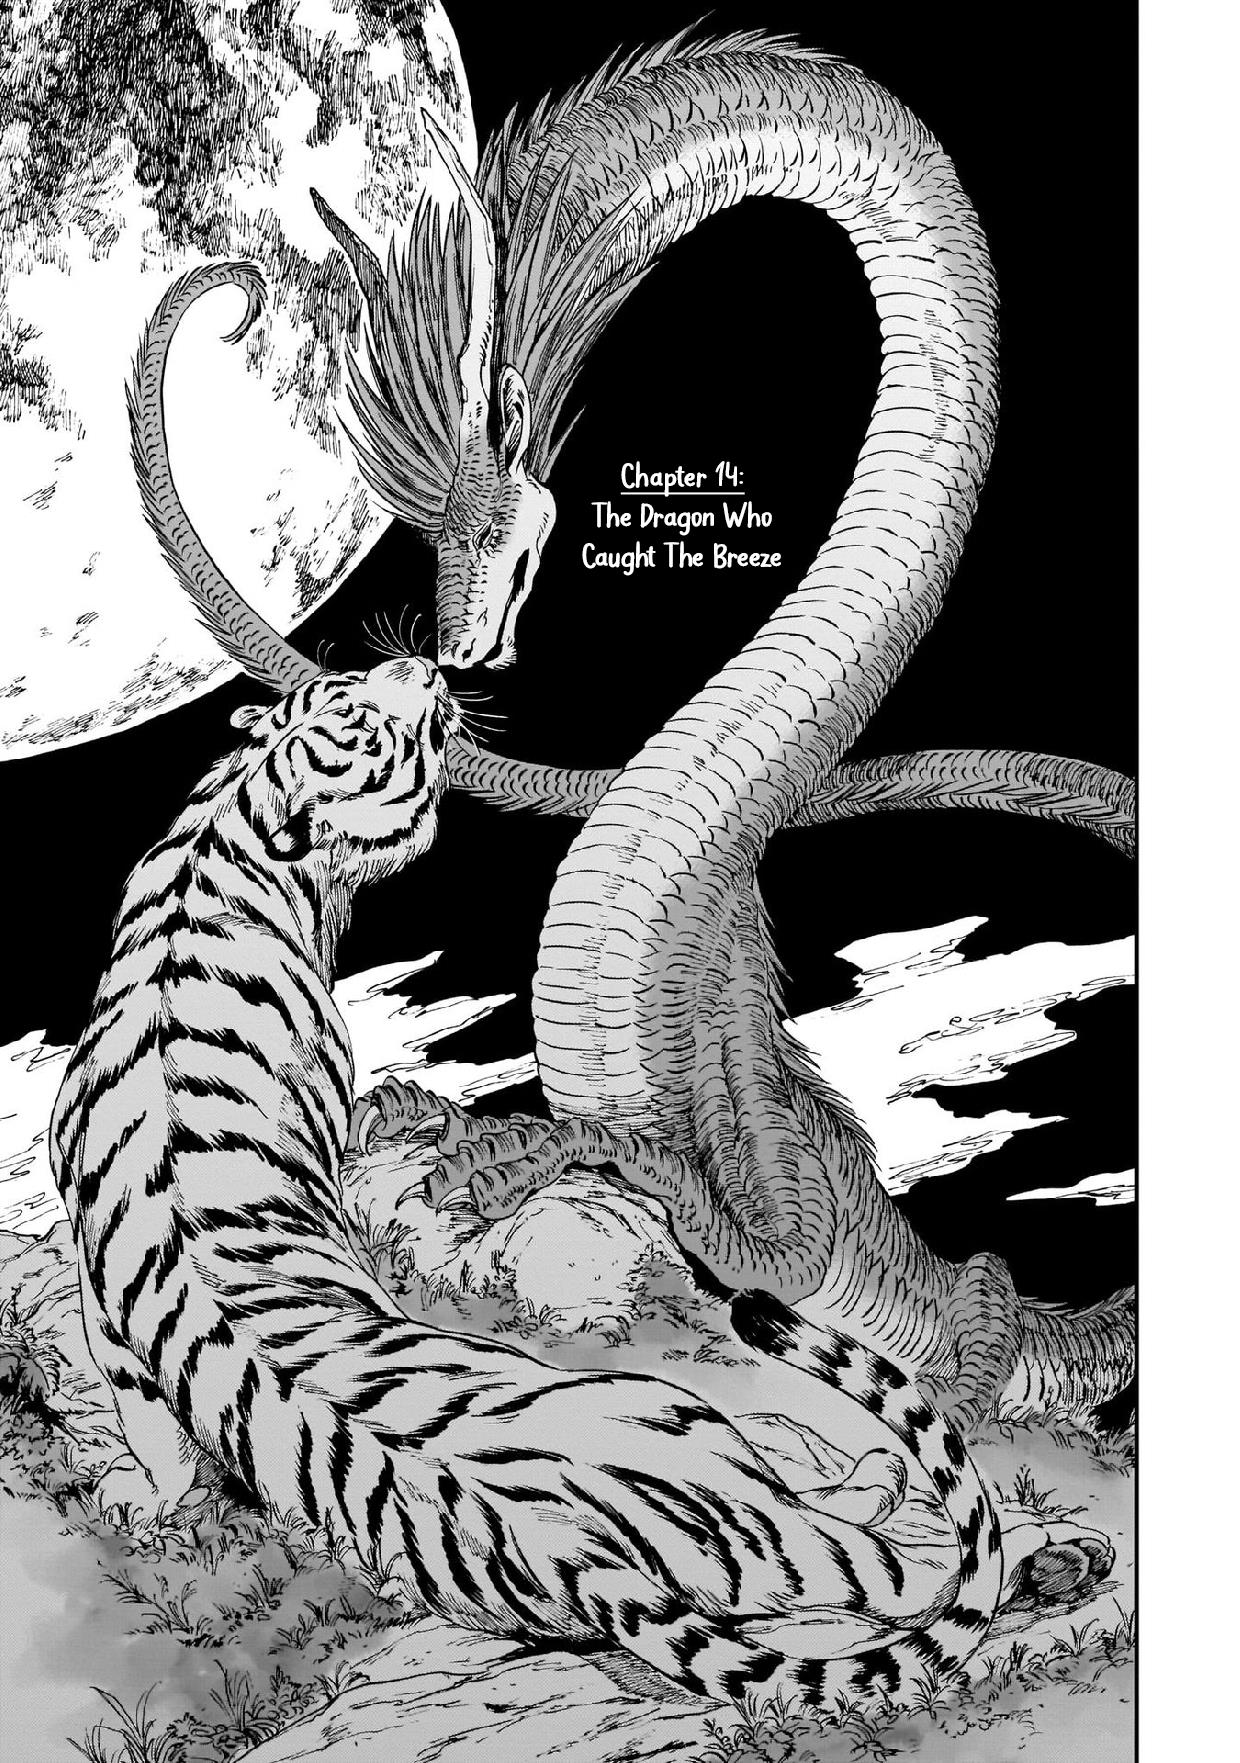 The Tiger Still Won't Eat The Dragon Vol.2 Chapter 14: The Dragon Who Caught The Breeze - Picture 1